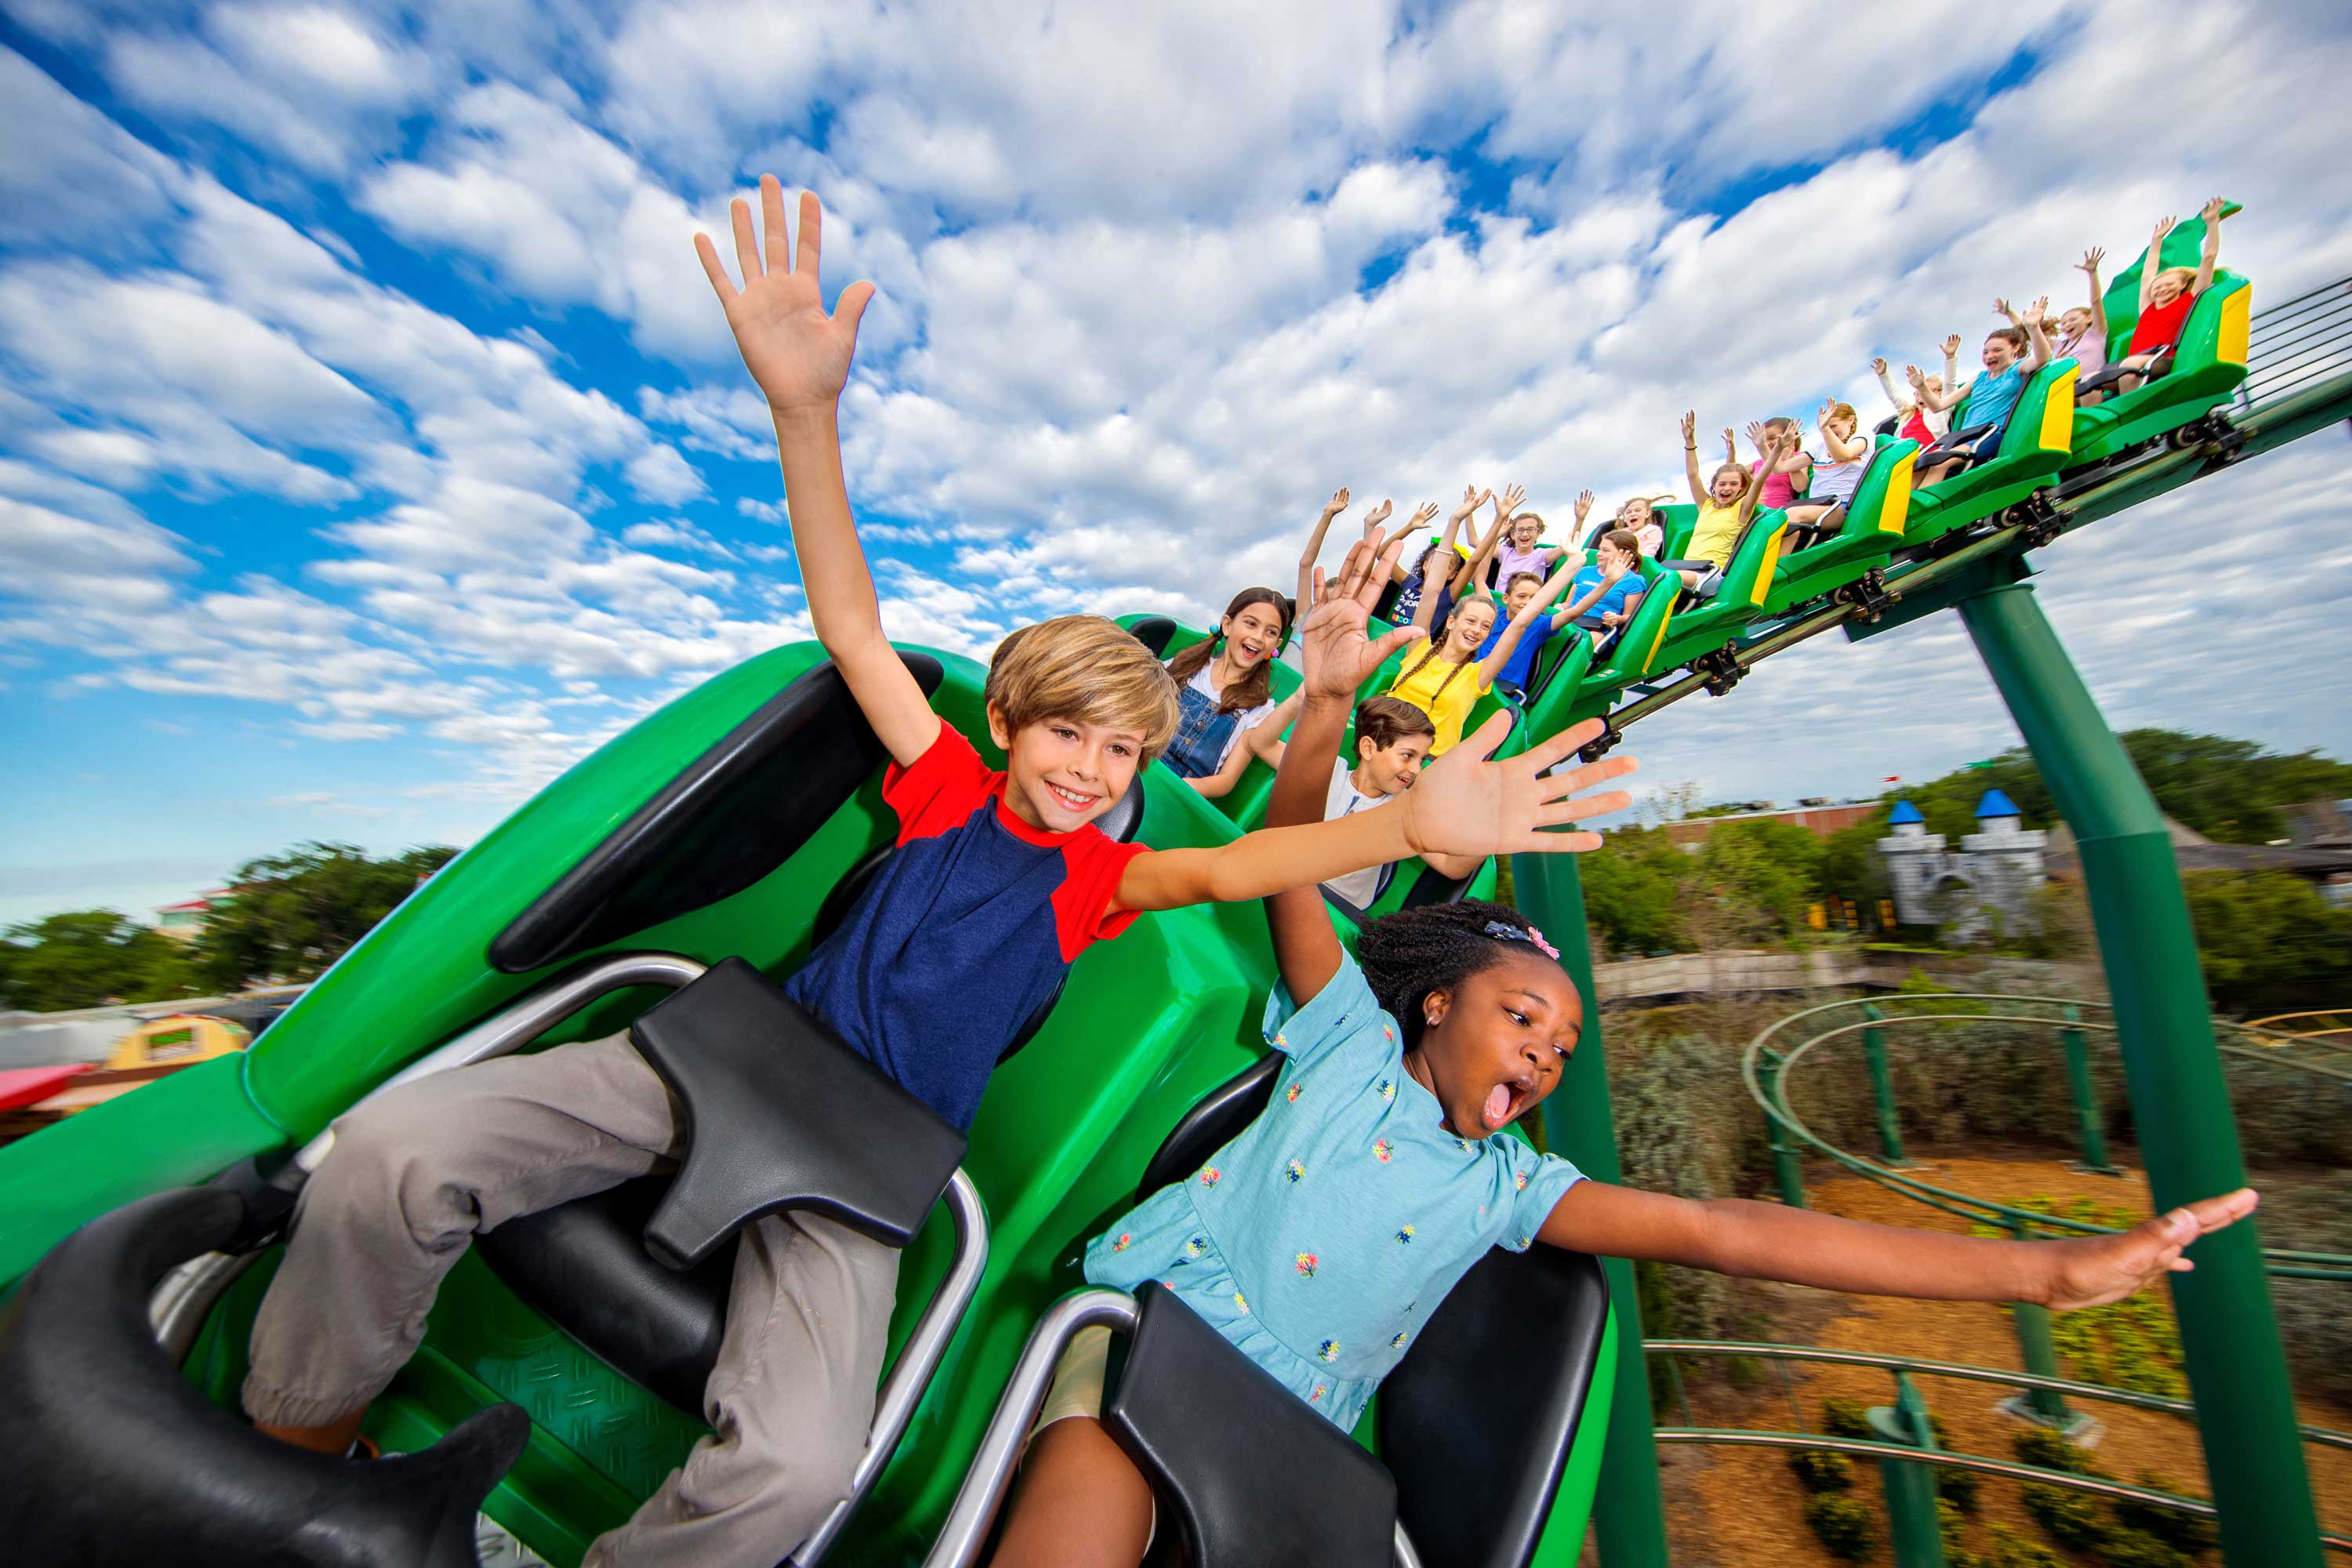 15 Best Theme Parks And Amusement Parks In California